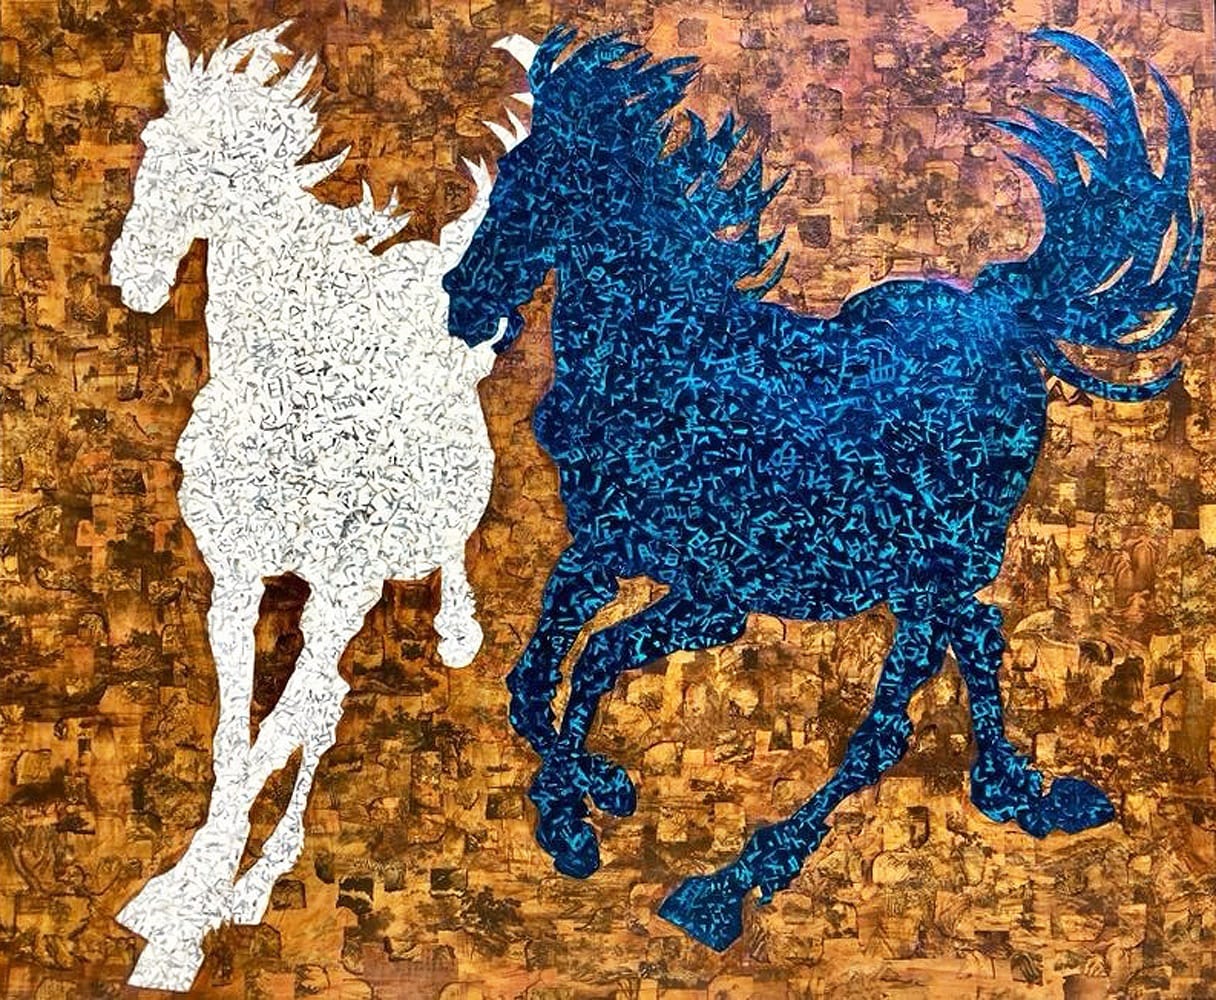 Xue Song 薛 松, Two Horses《雙馬》, 2018